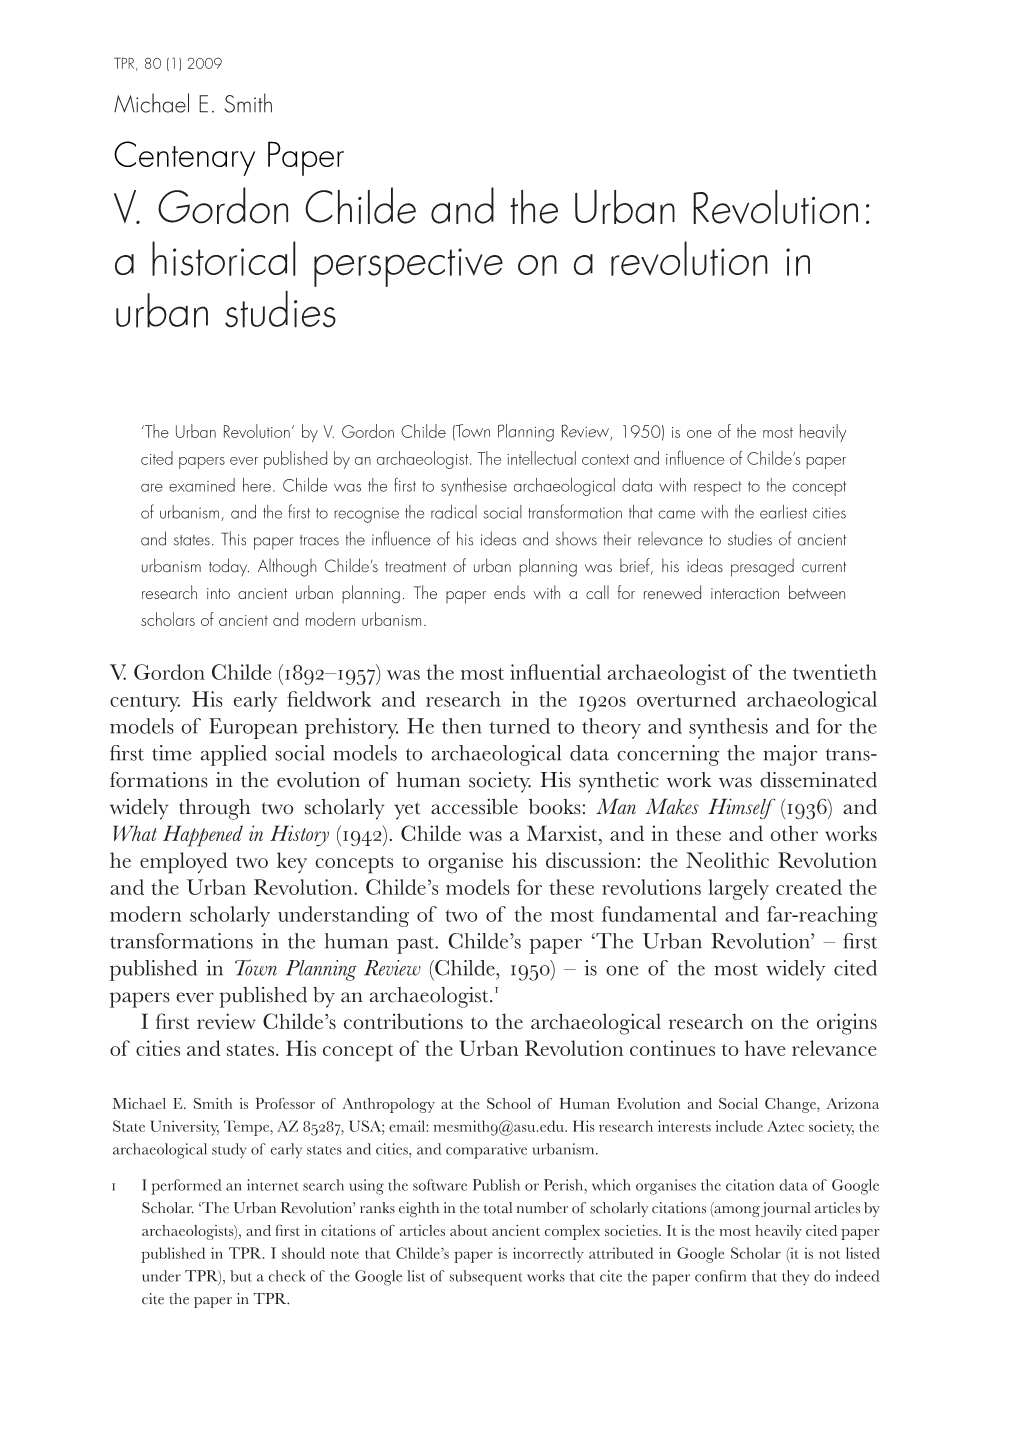 V. Gordon Childe and the Urban Revolution: a Historical Perspective on a Revolution in Urban Studies